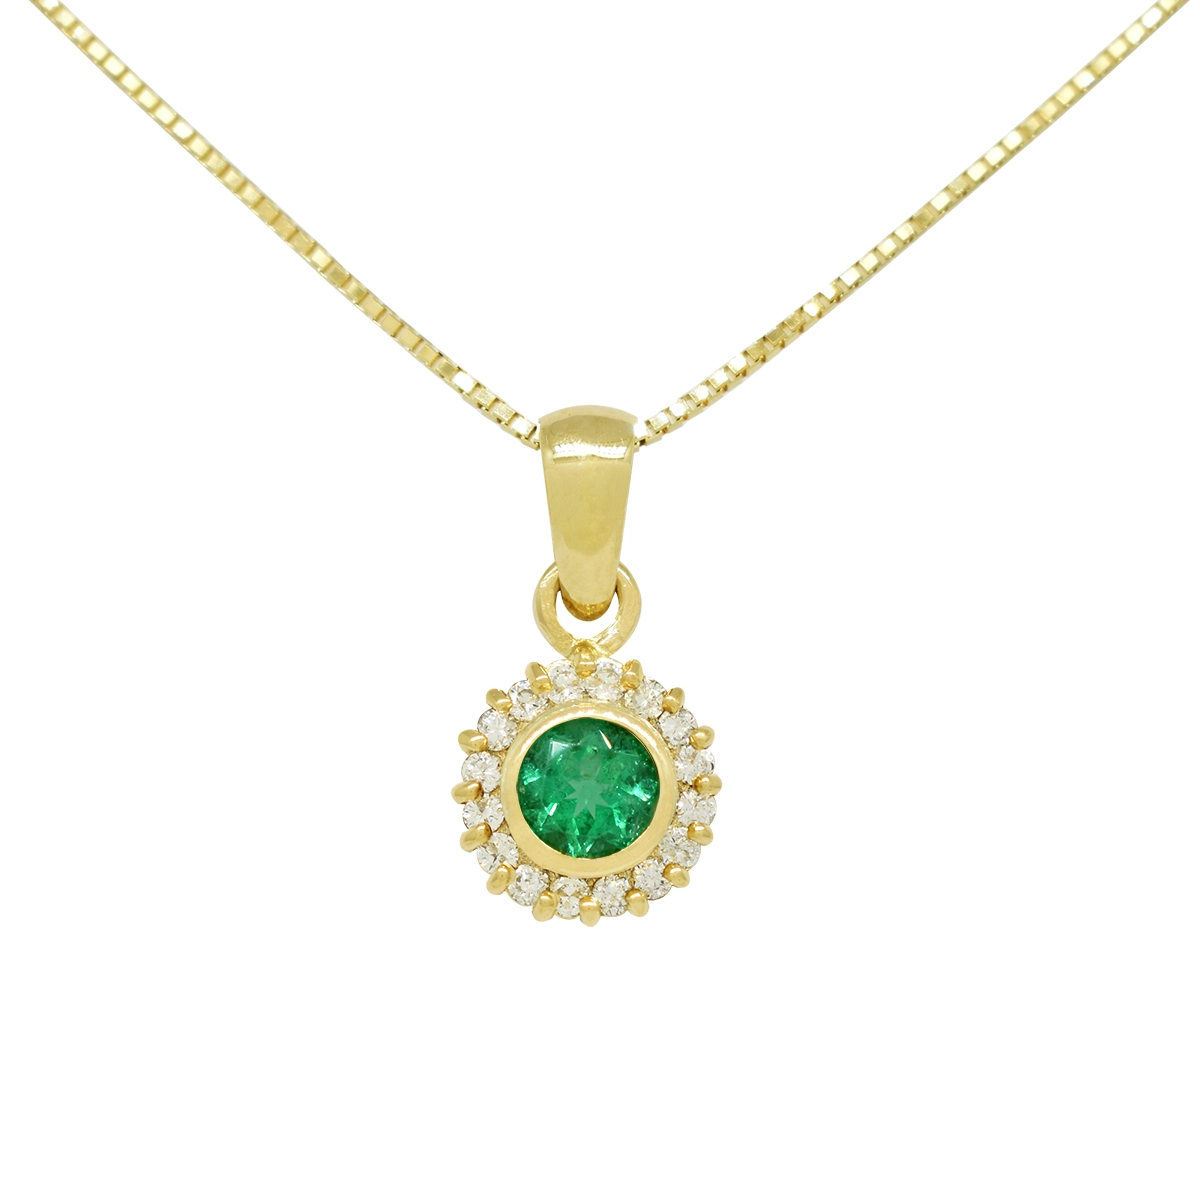 Emerald and diamond pendant necklace in solid 18K yellow gold with round cut natural Colombian emerald in a bezel setting and 16 brilliant cut diamonds in prong setting